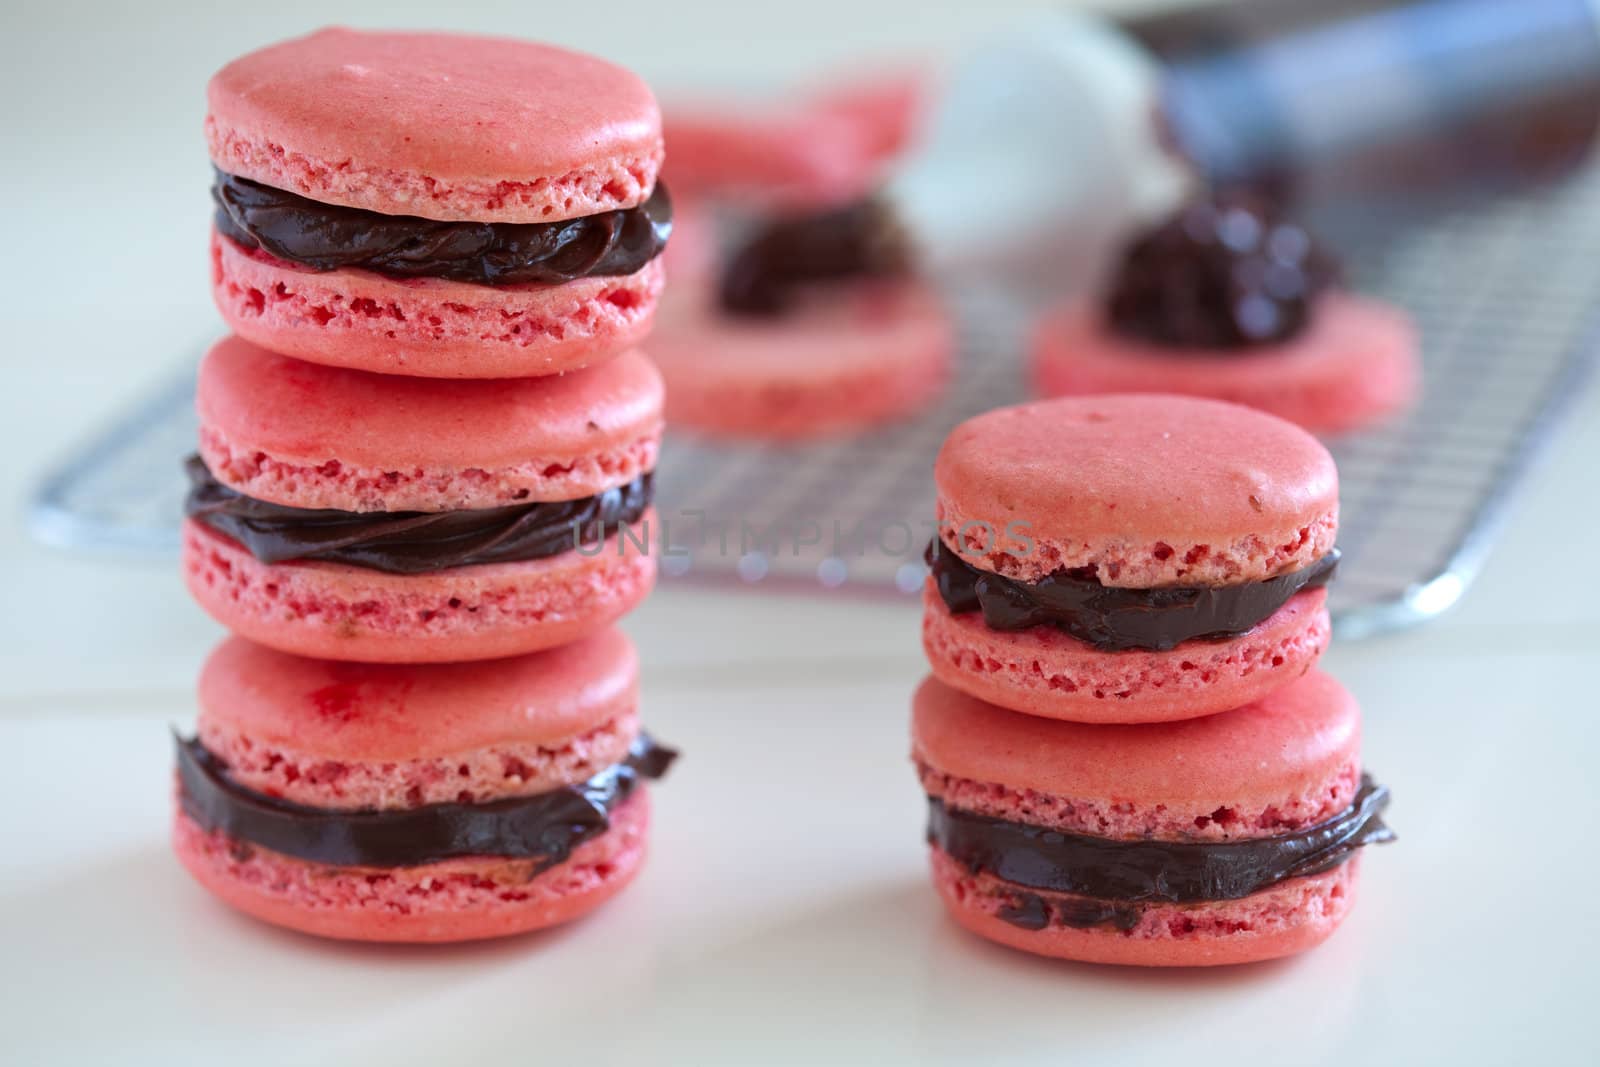 Chocolate filled macarons by Fotosmurf